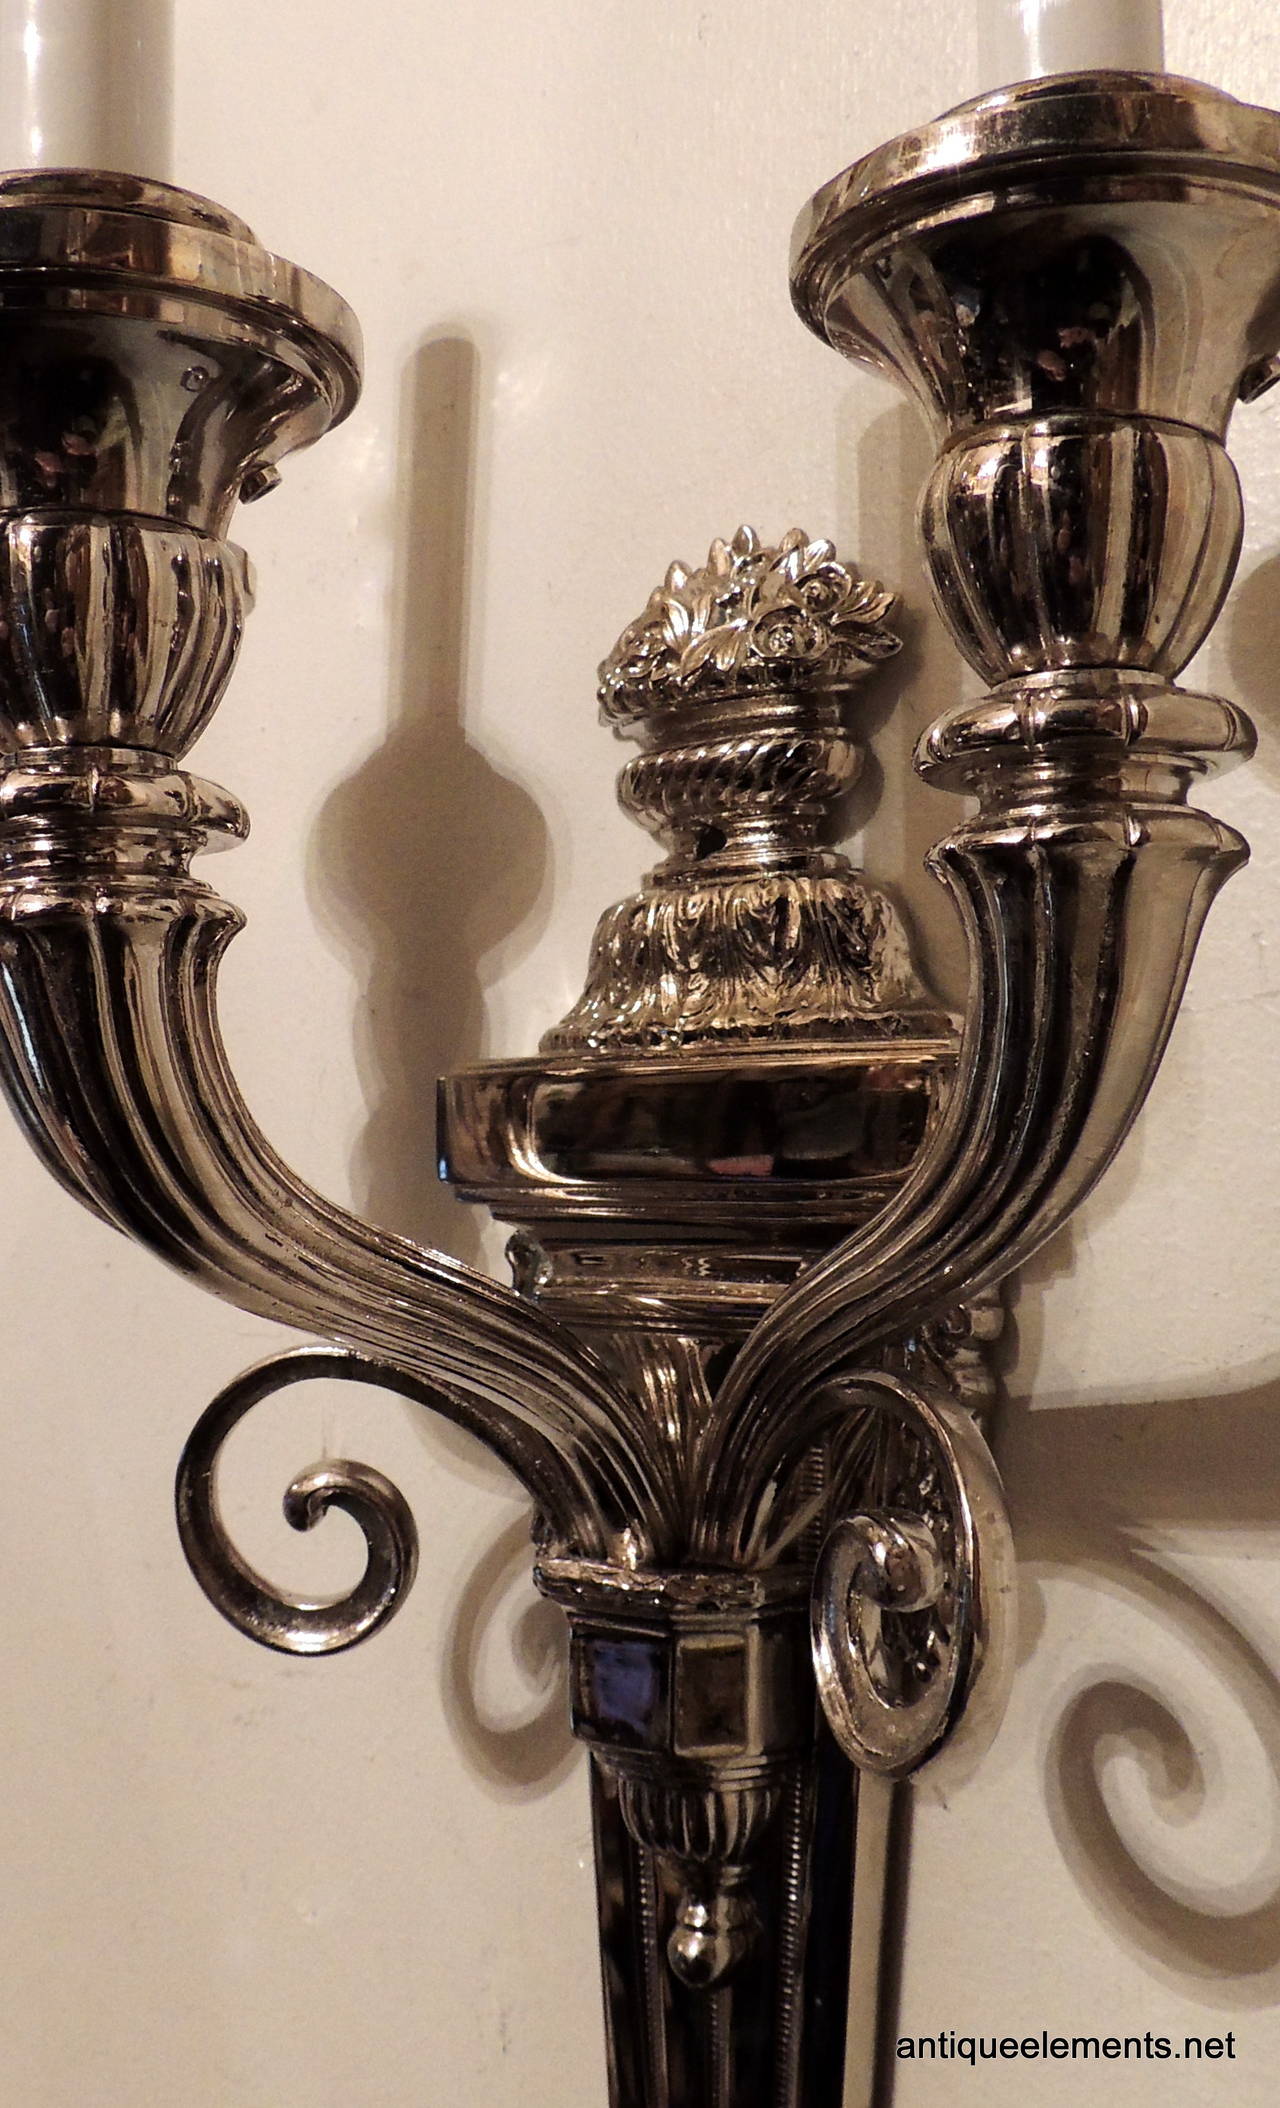 Neoclassical Nickel-Plated Three-Arm Sconces Attributed to Caldwell For Sale 1